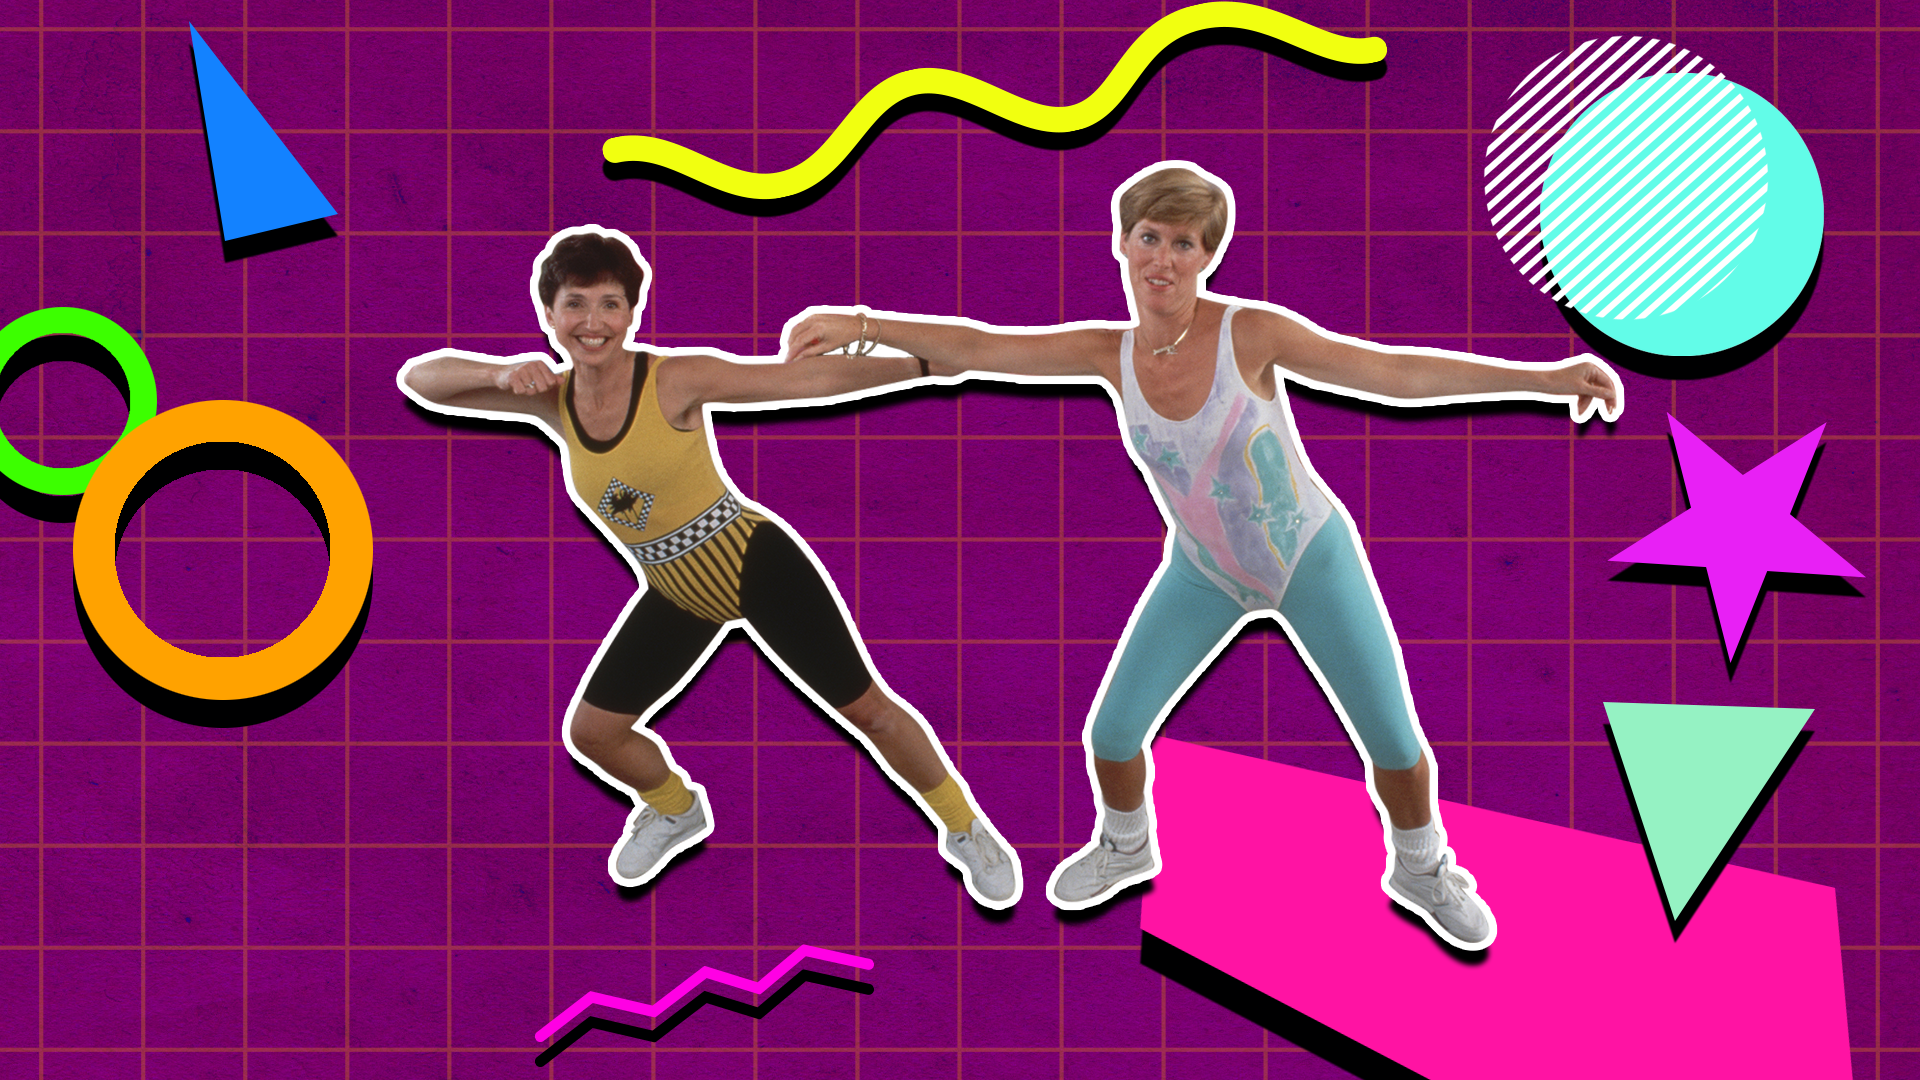 Jazzercise is 50, and it has evolved beyond lunges, legwarmers and leotards